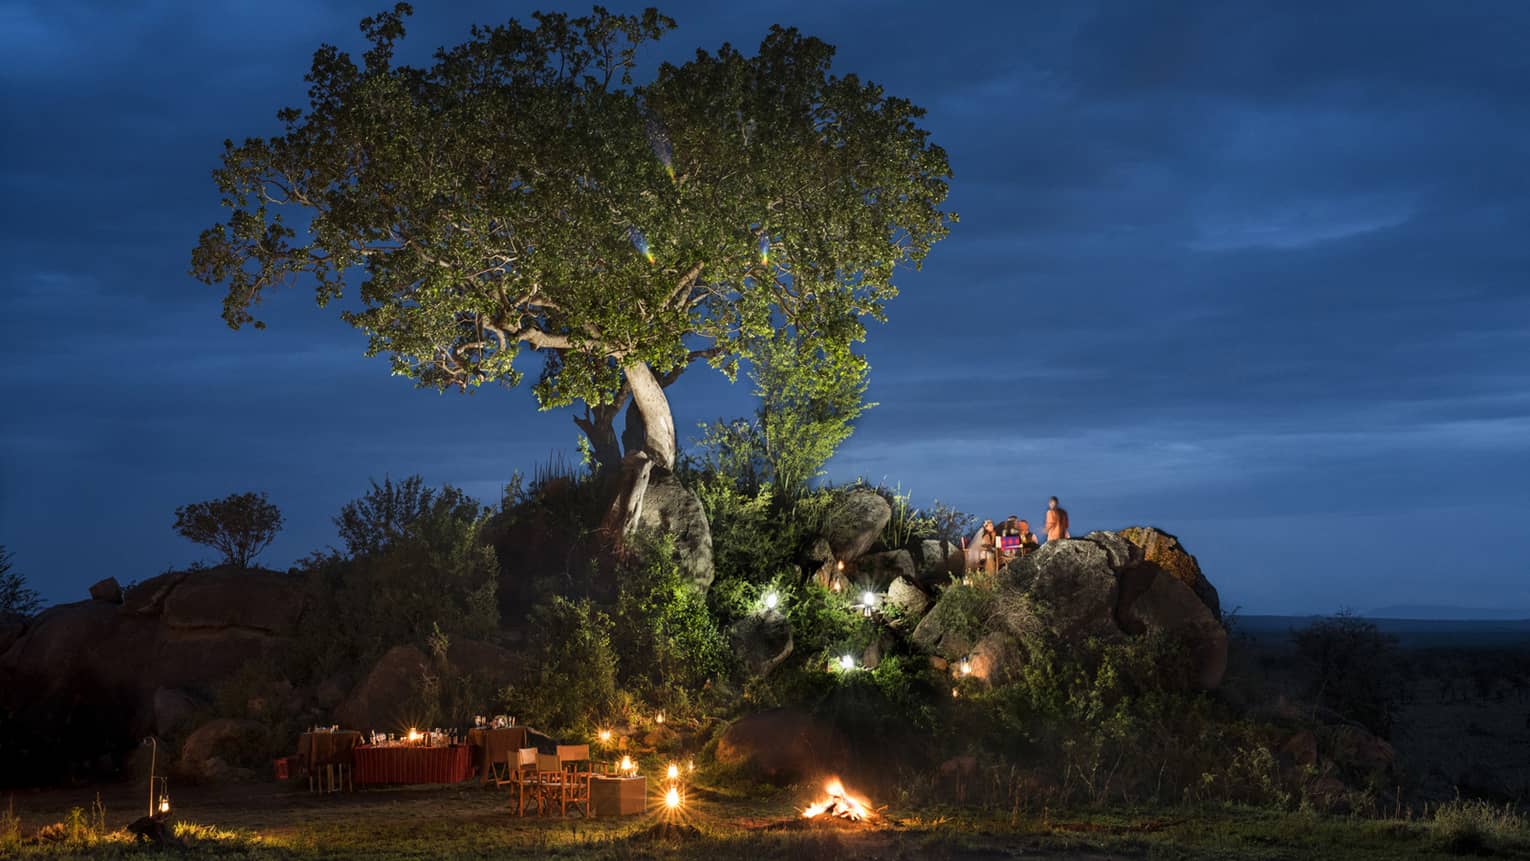 Bride and groom sit on large rock under tree, over candle-lit dining tables at night